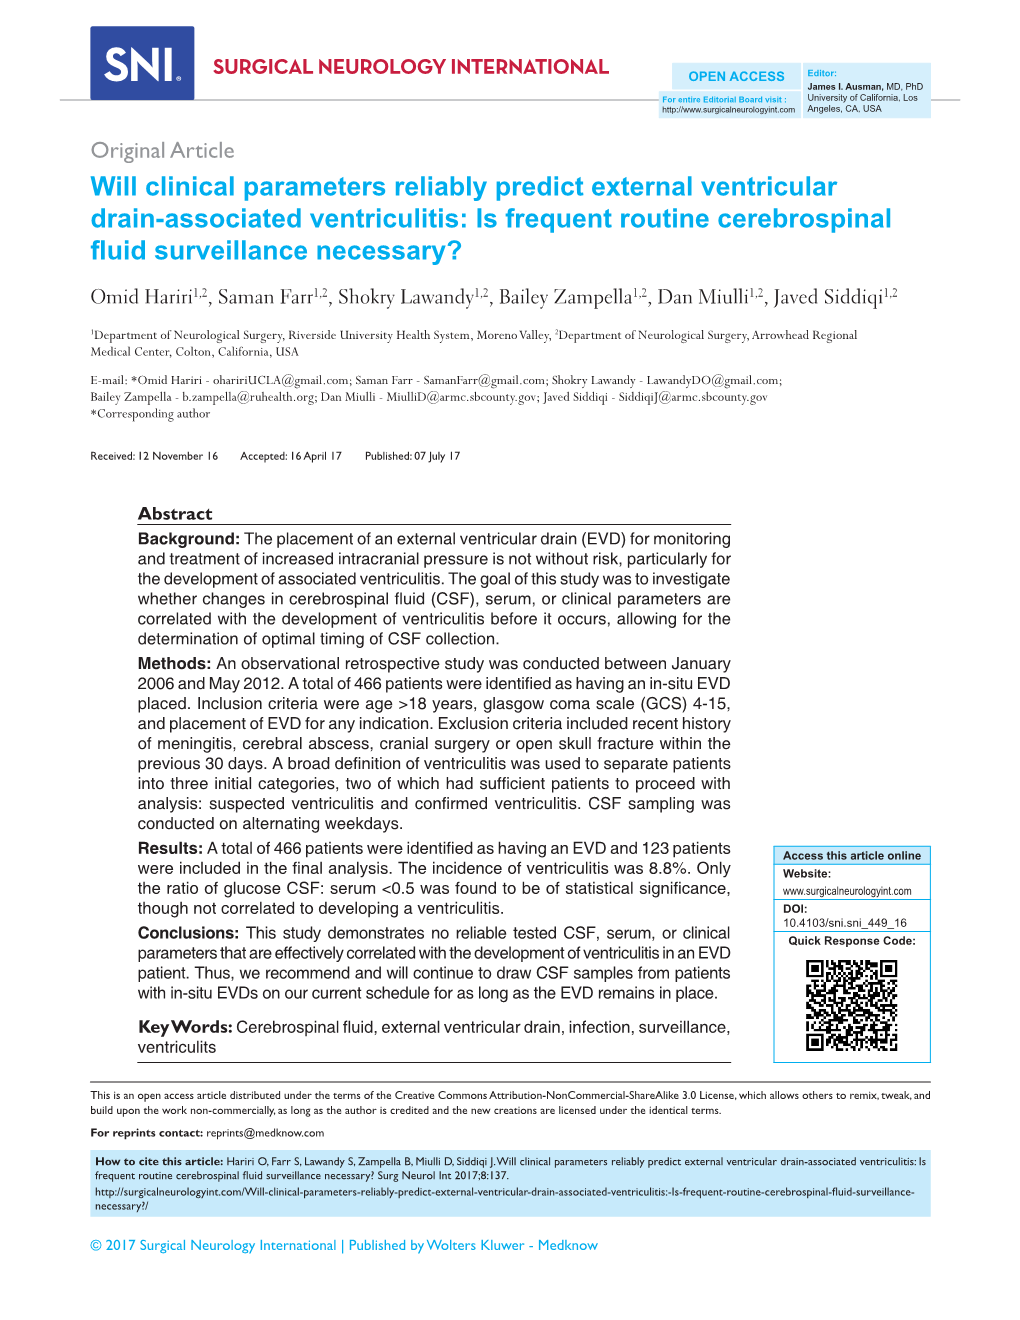 Will Clinical Parameters Reliably Predict External Ventricular Drain